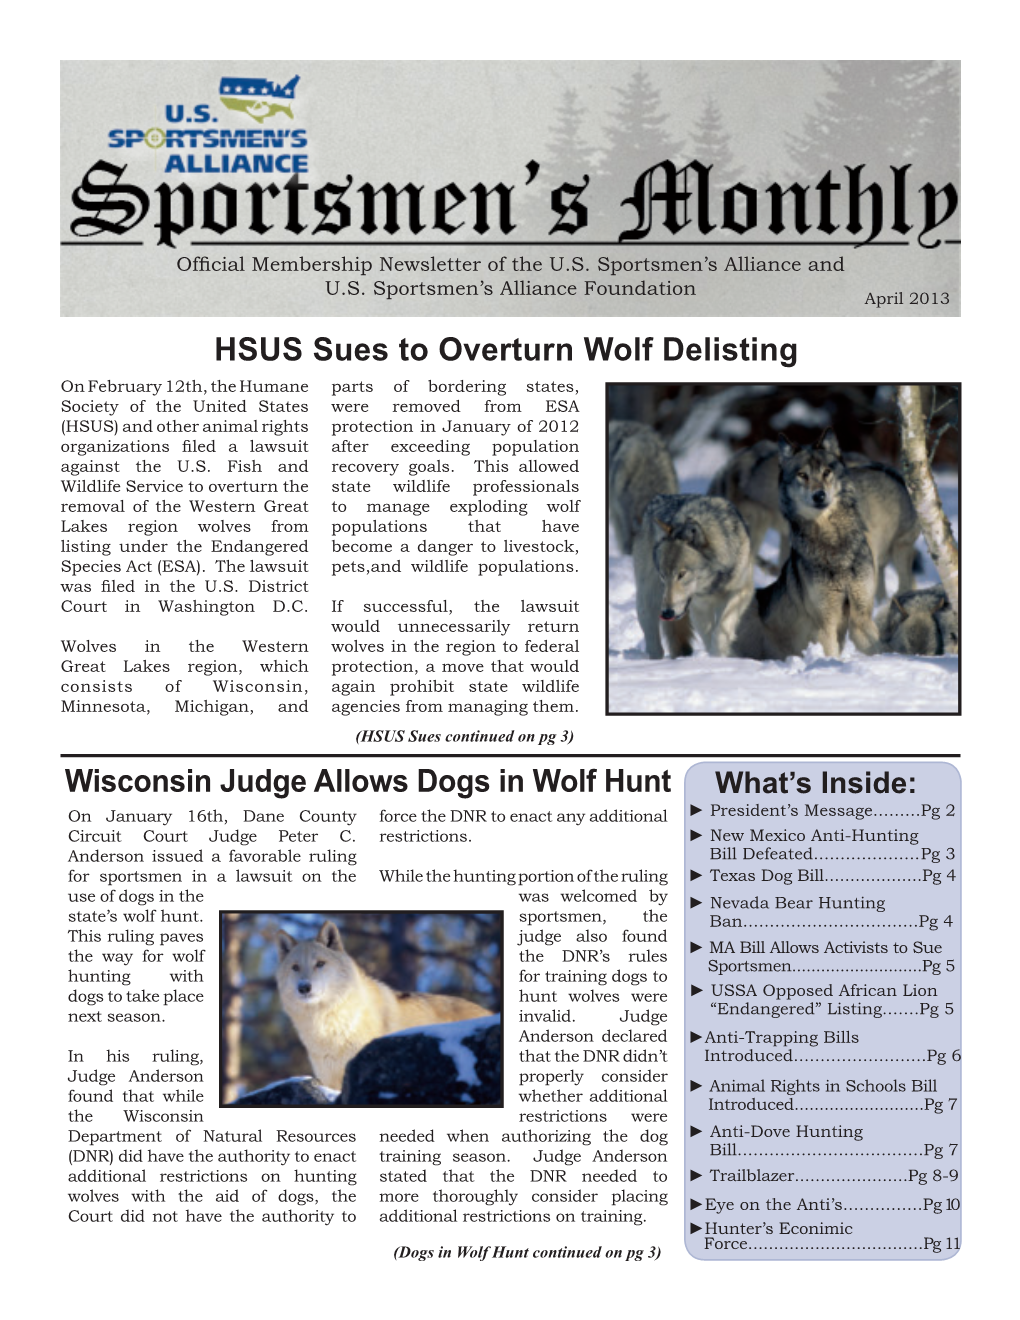 HSUS Sues to Overturn Wolf Delisting